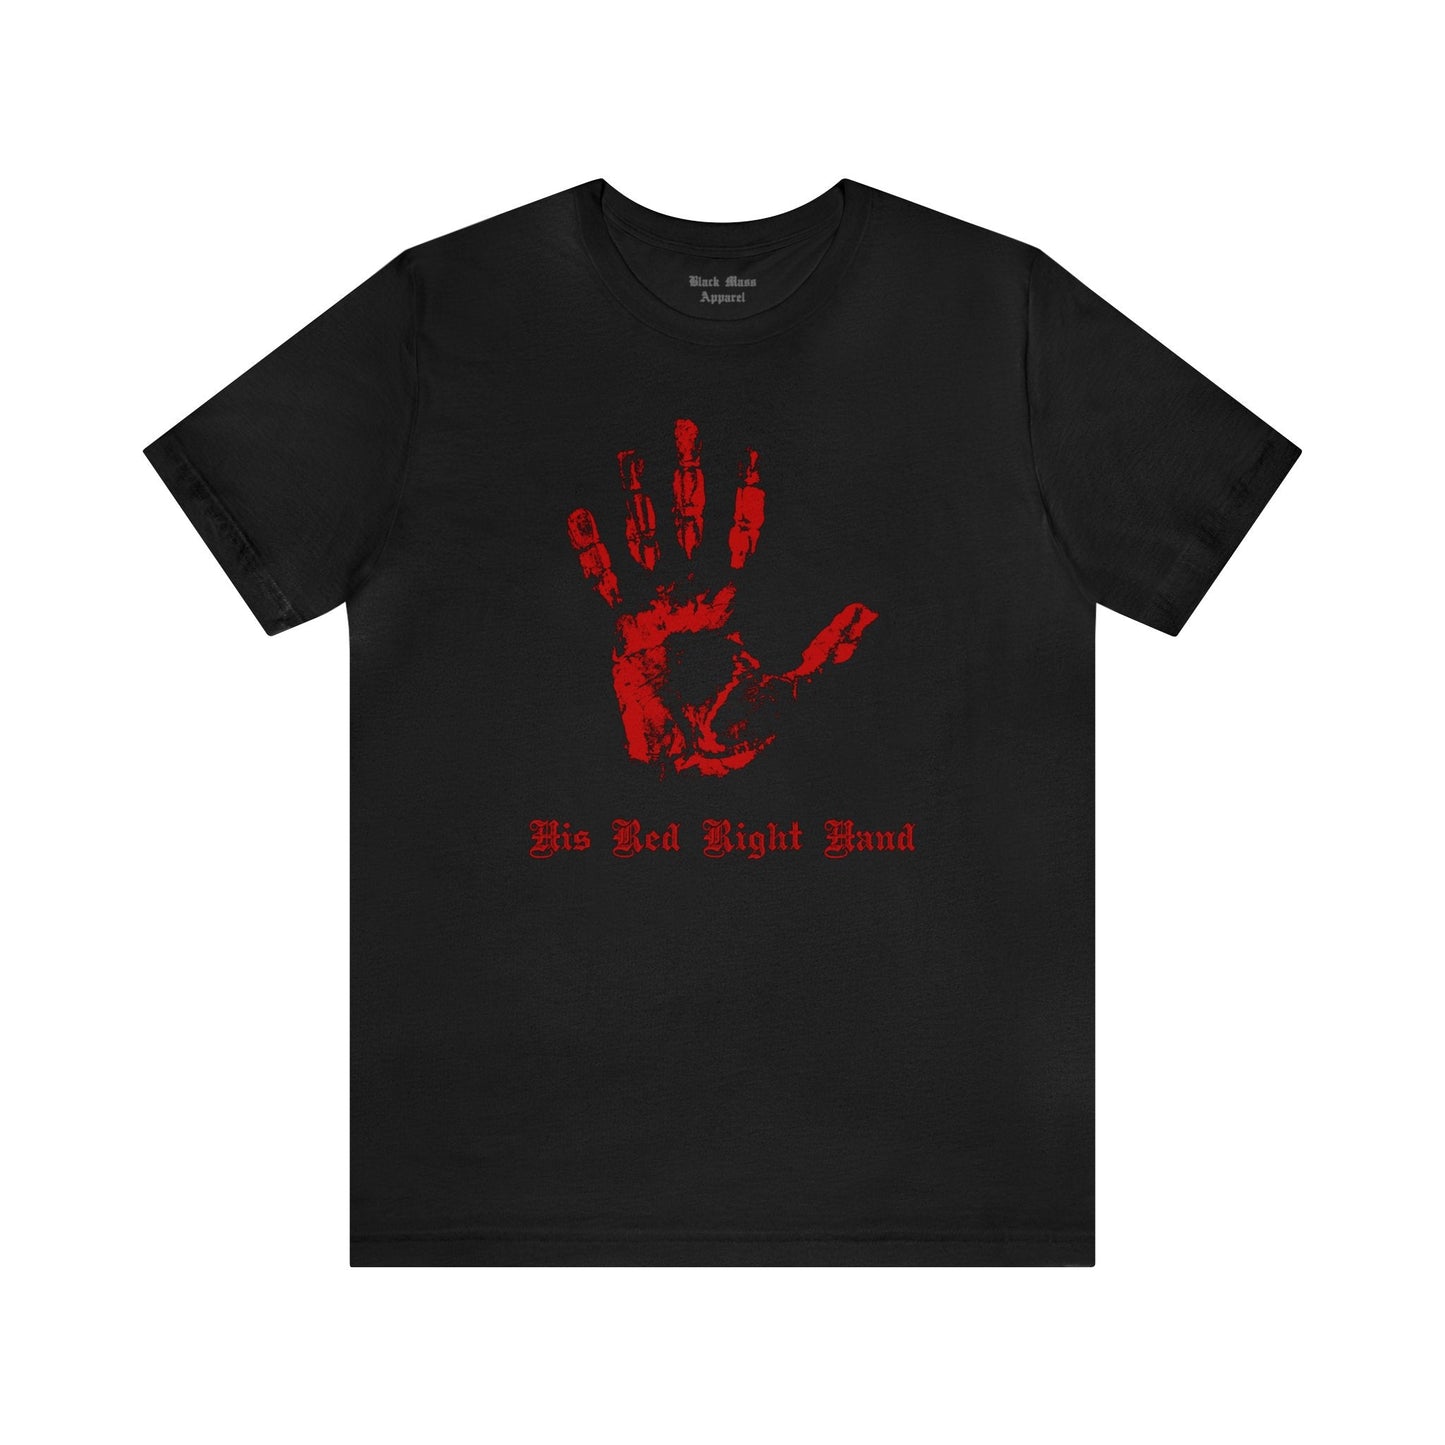 His Red Right Hand - Black Mass Apparel - T-Shirt